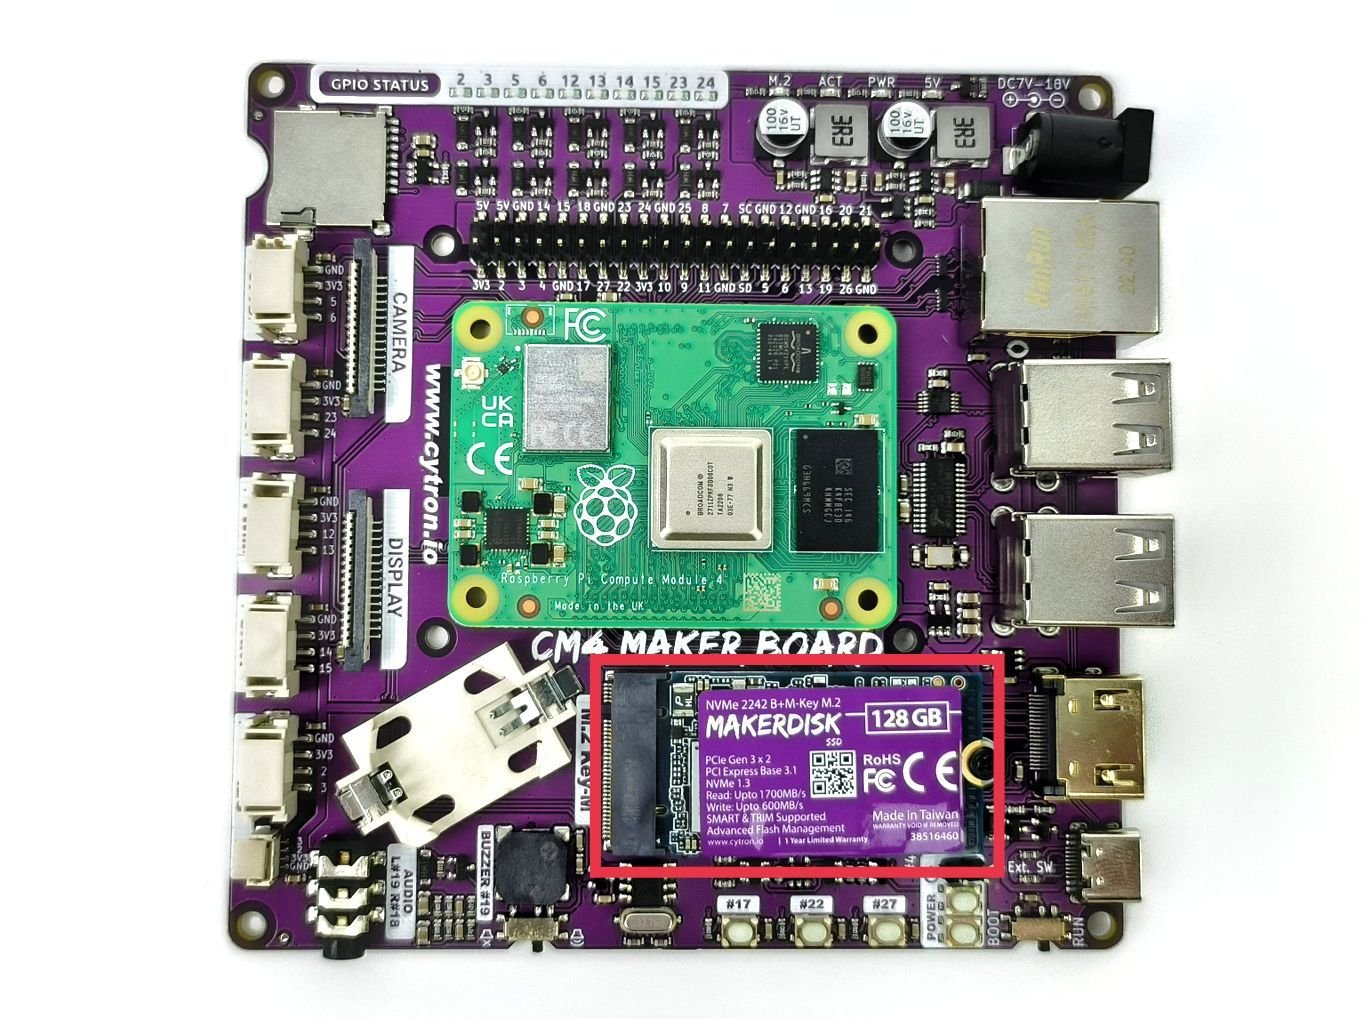 How To Boot A Raspberry Pi 4 From An SSD 